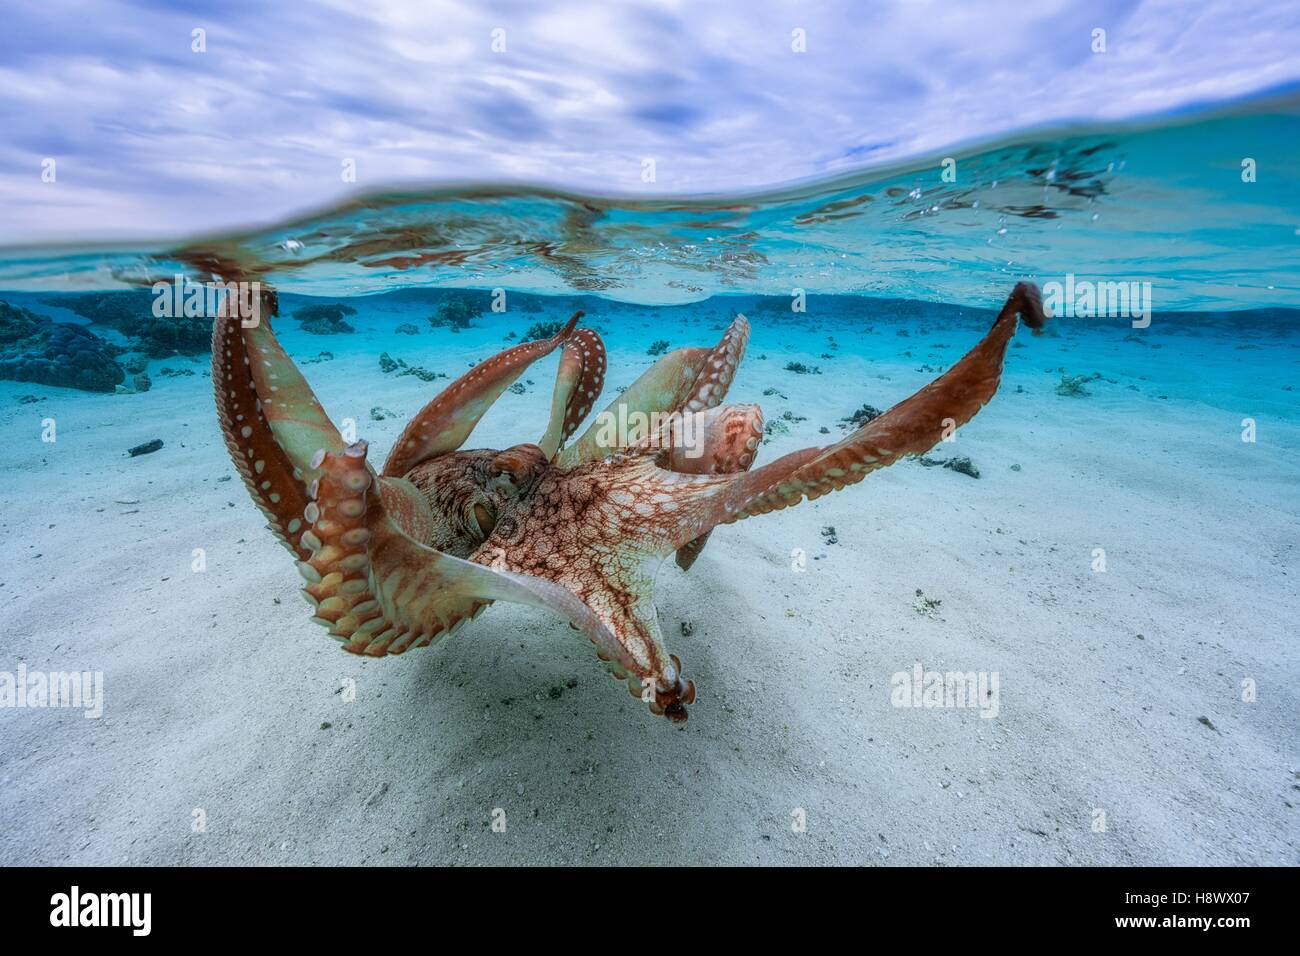 Octopus (Octopus sp) spreading its tentacles in the lagoon, Mayotte, Indian Ocean. Stock Photo